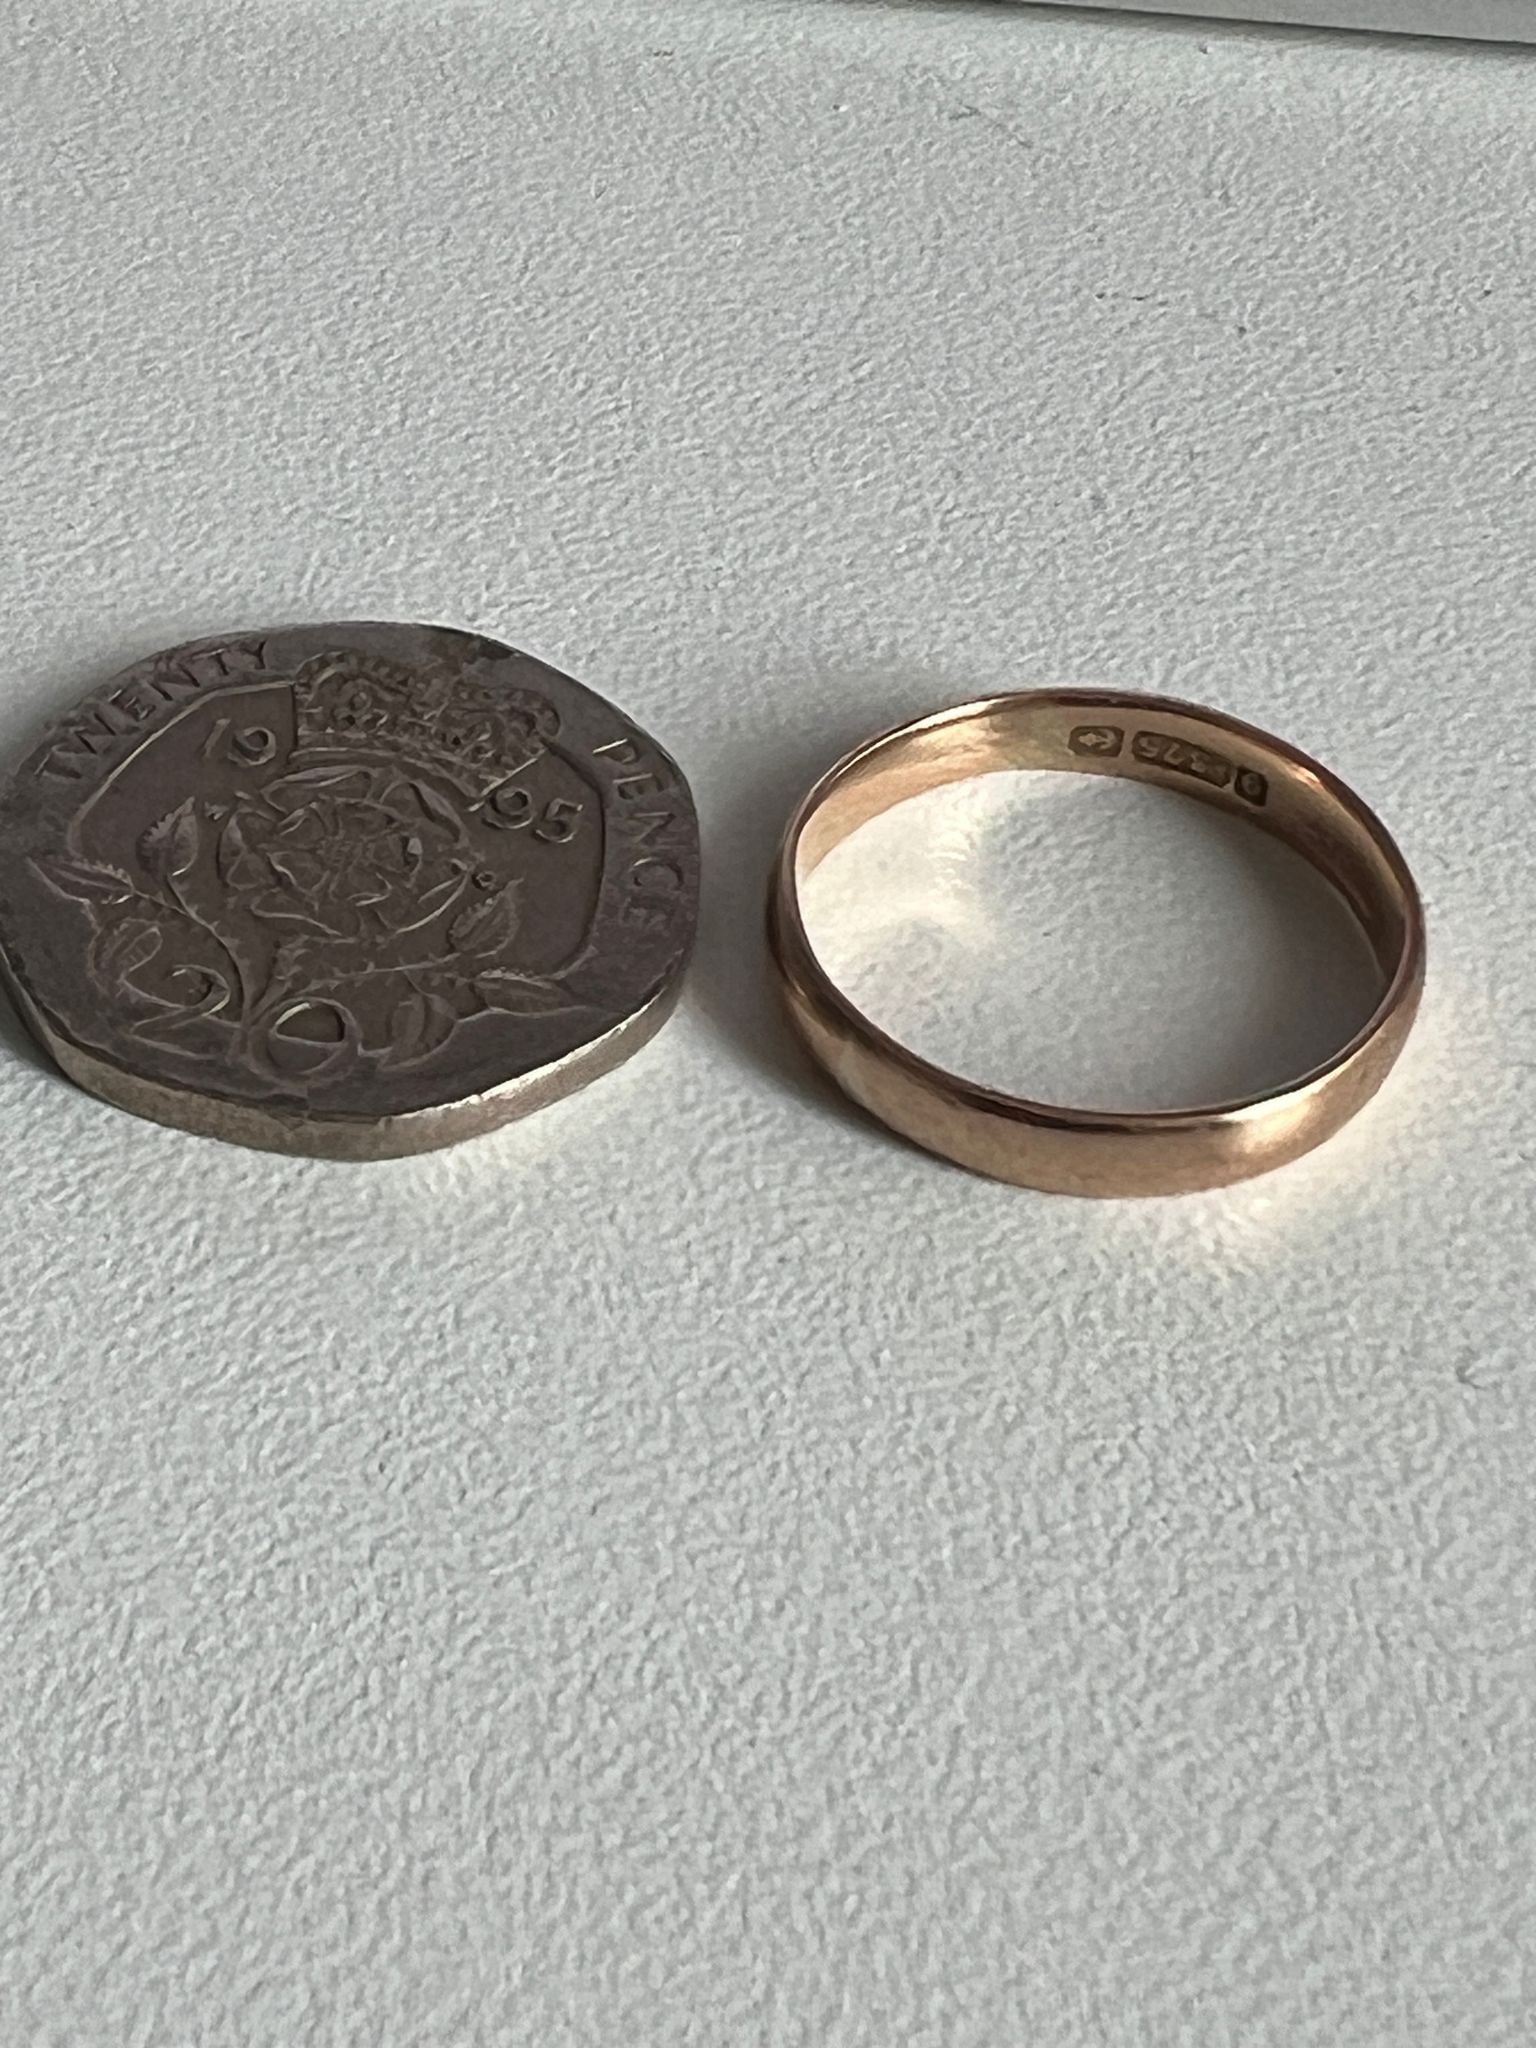 Ring next to 20p coin